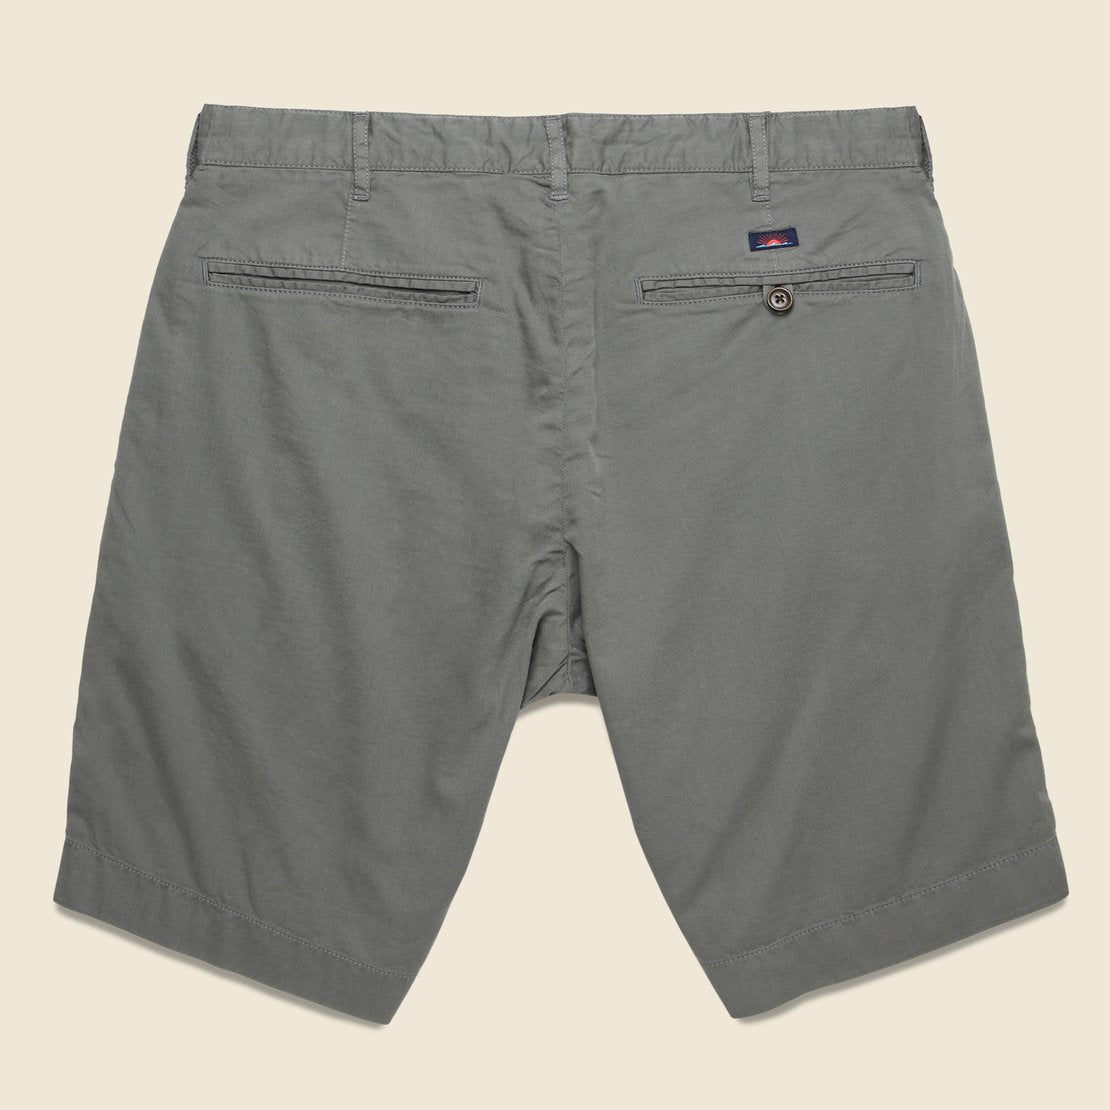 Bay Short - Slate - Faherty - STAG Provisions - Shorts - Solid